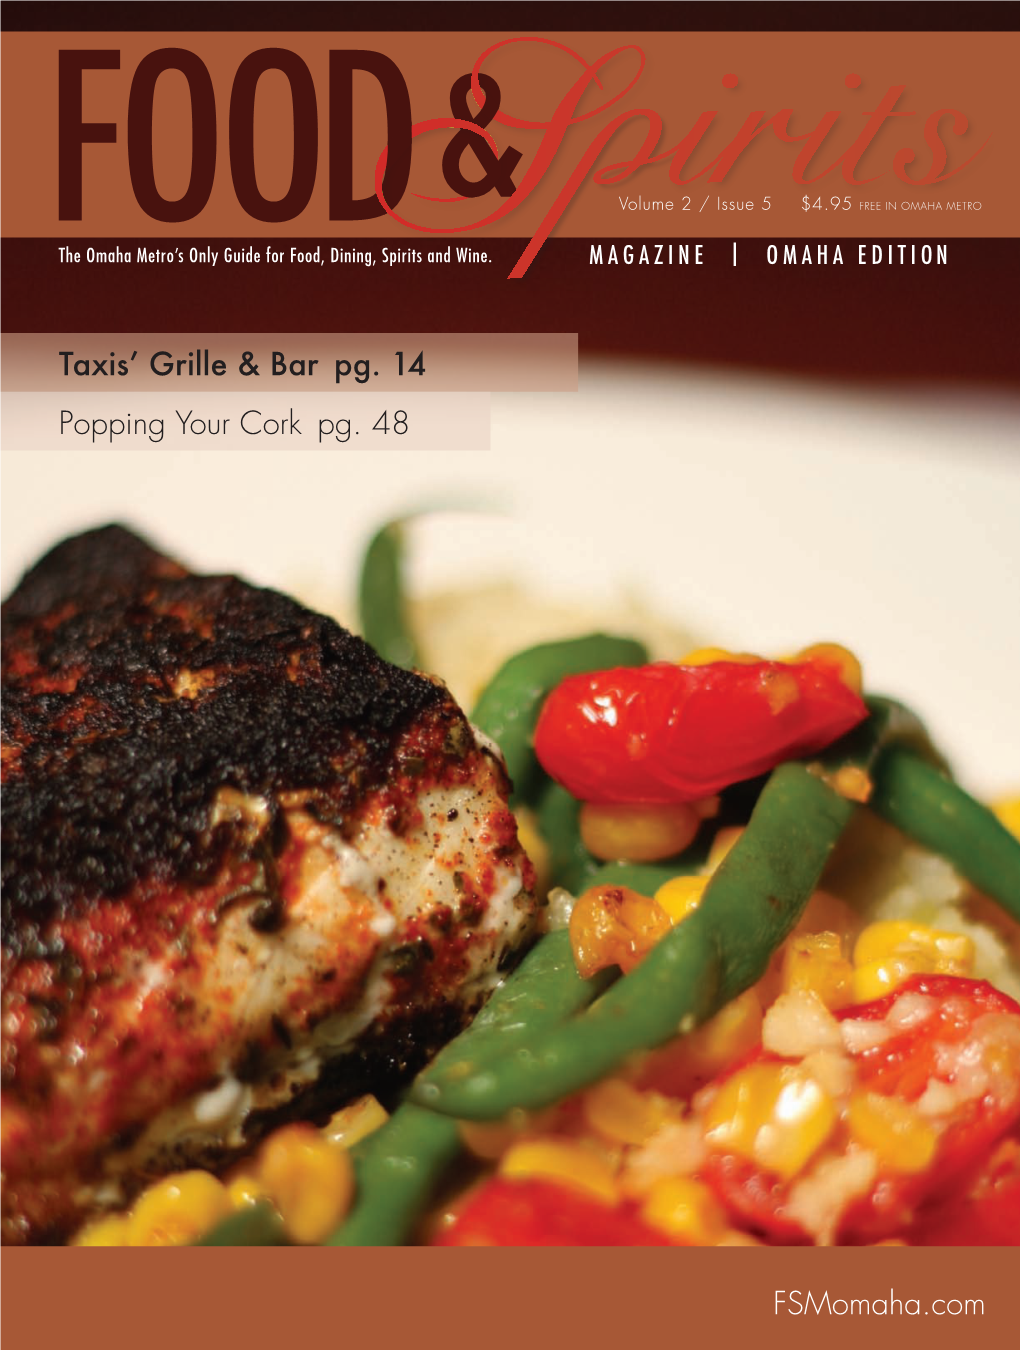 Taxis' Grille & Bar Pg. 14 Popping Your Cork Pg. 48 Fsmomaha.Com